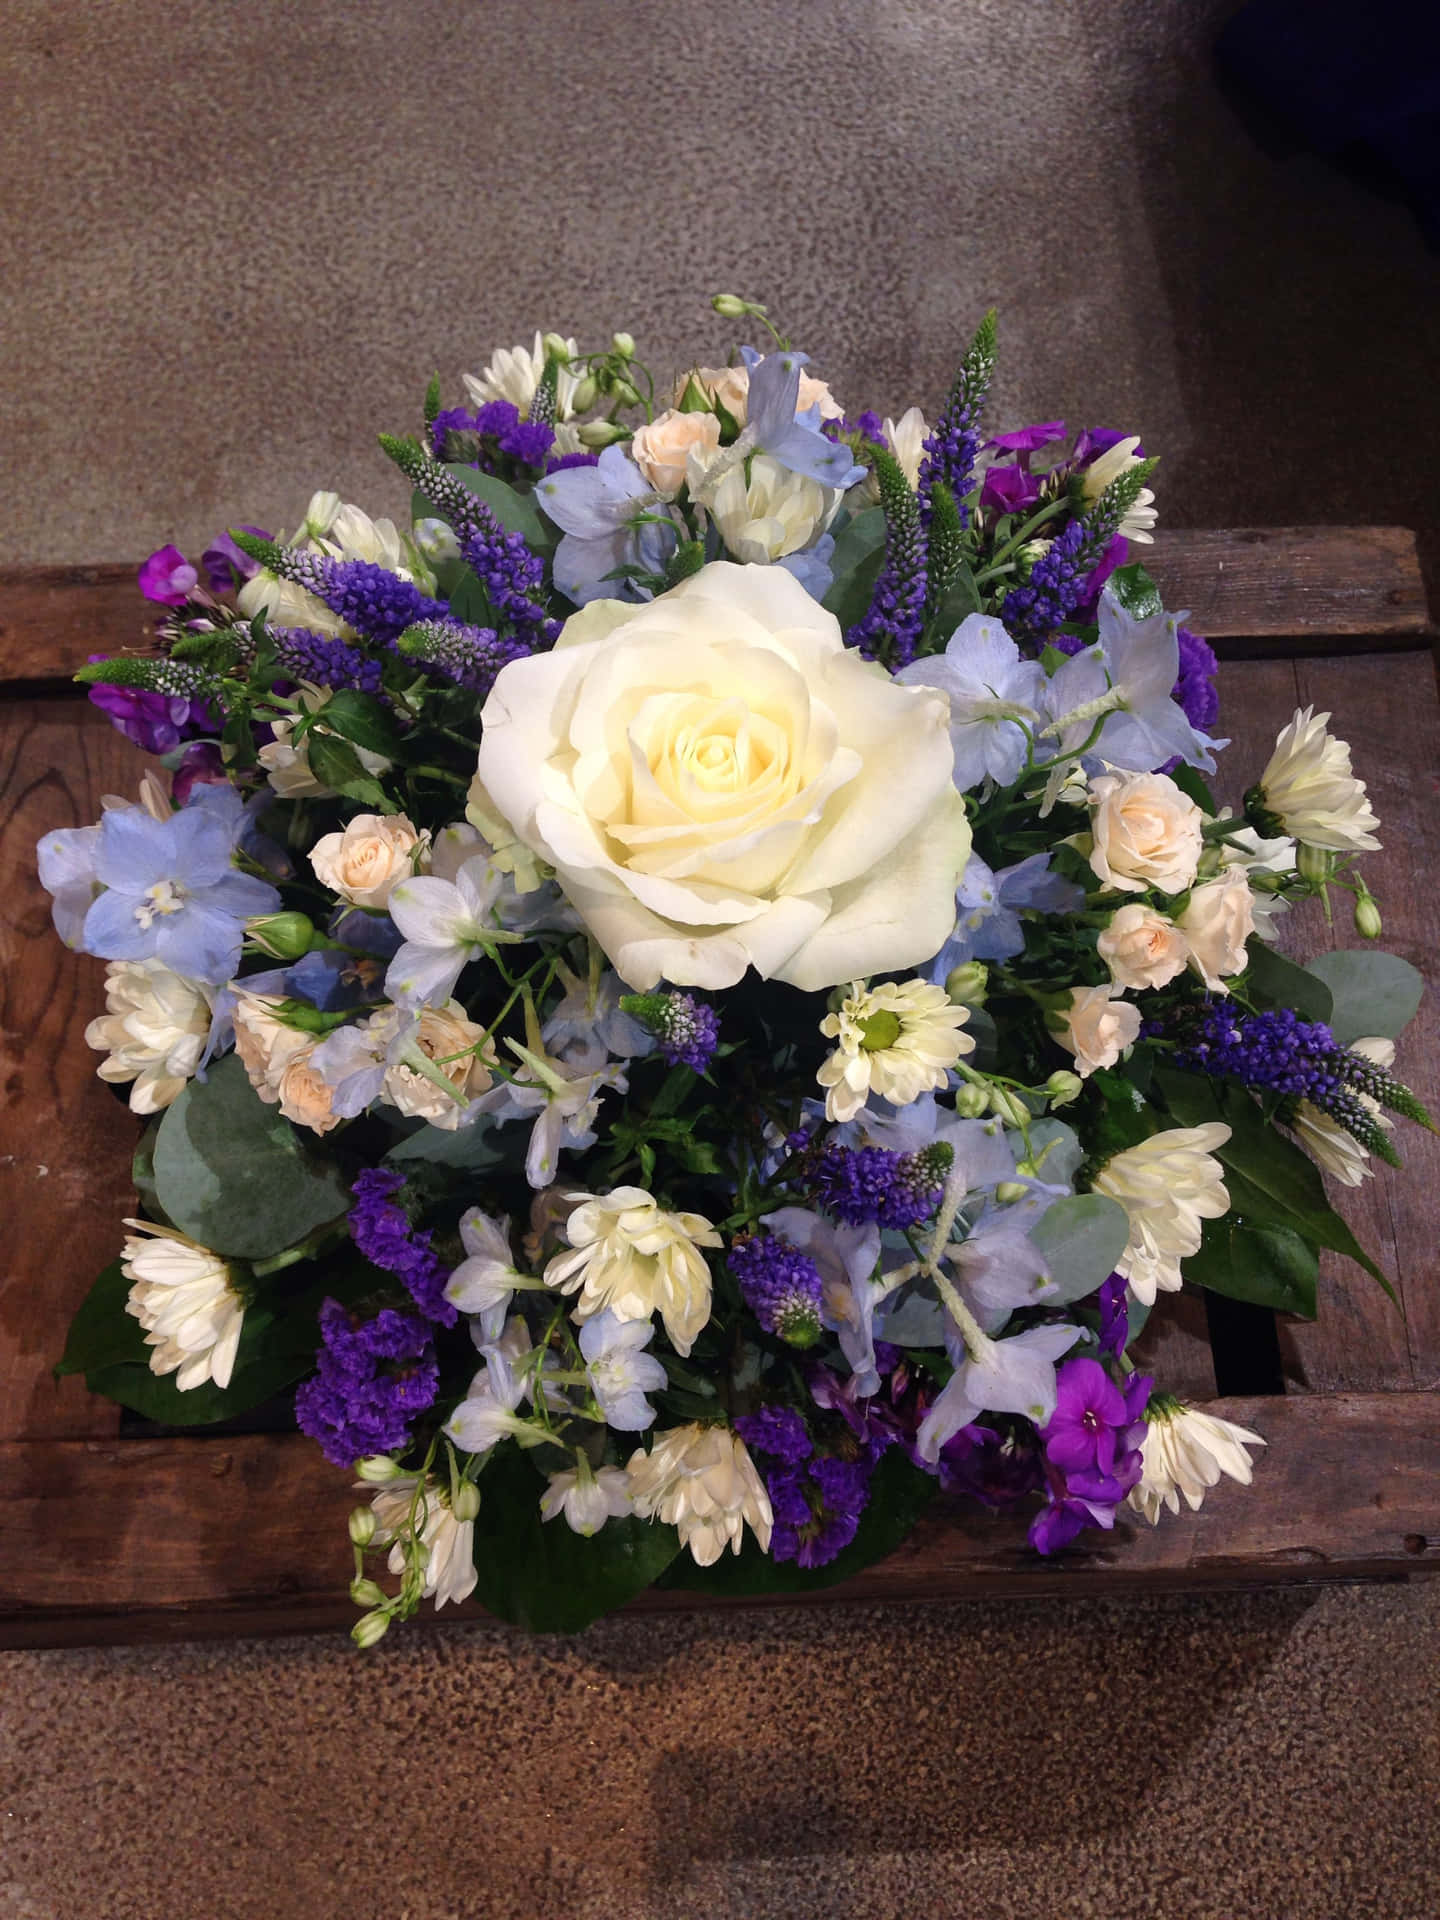 Colorful floral funeral arrangement to commemorate a loved one